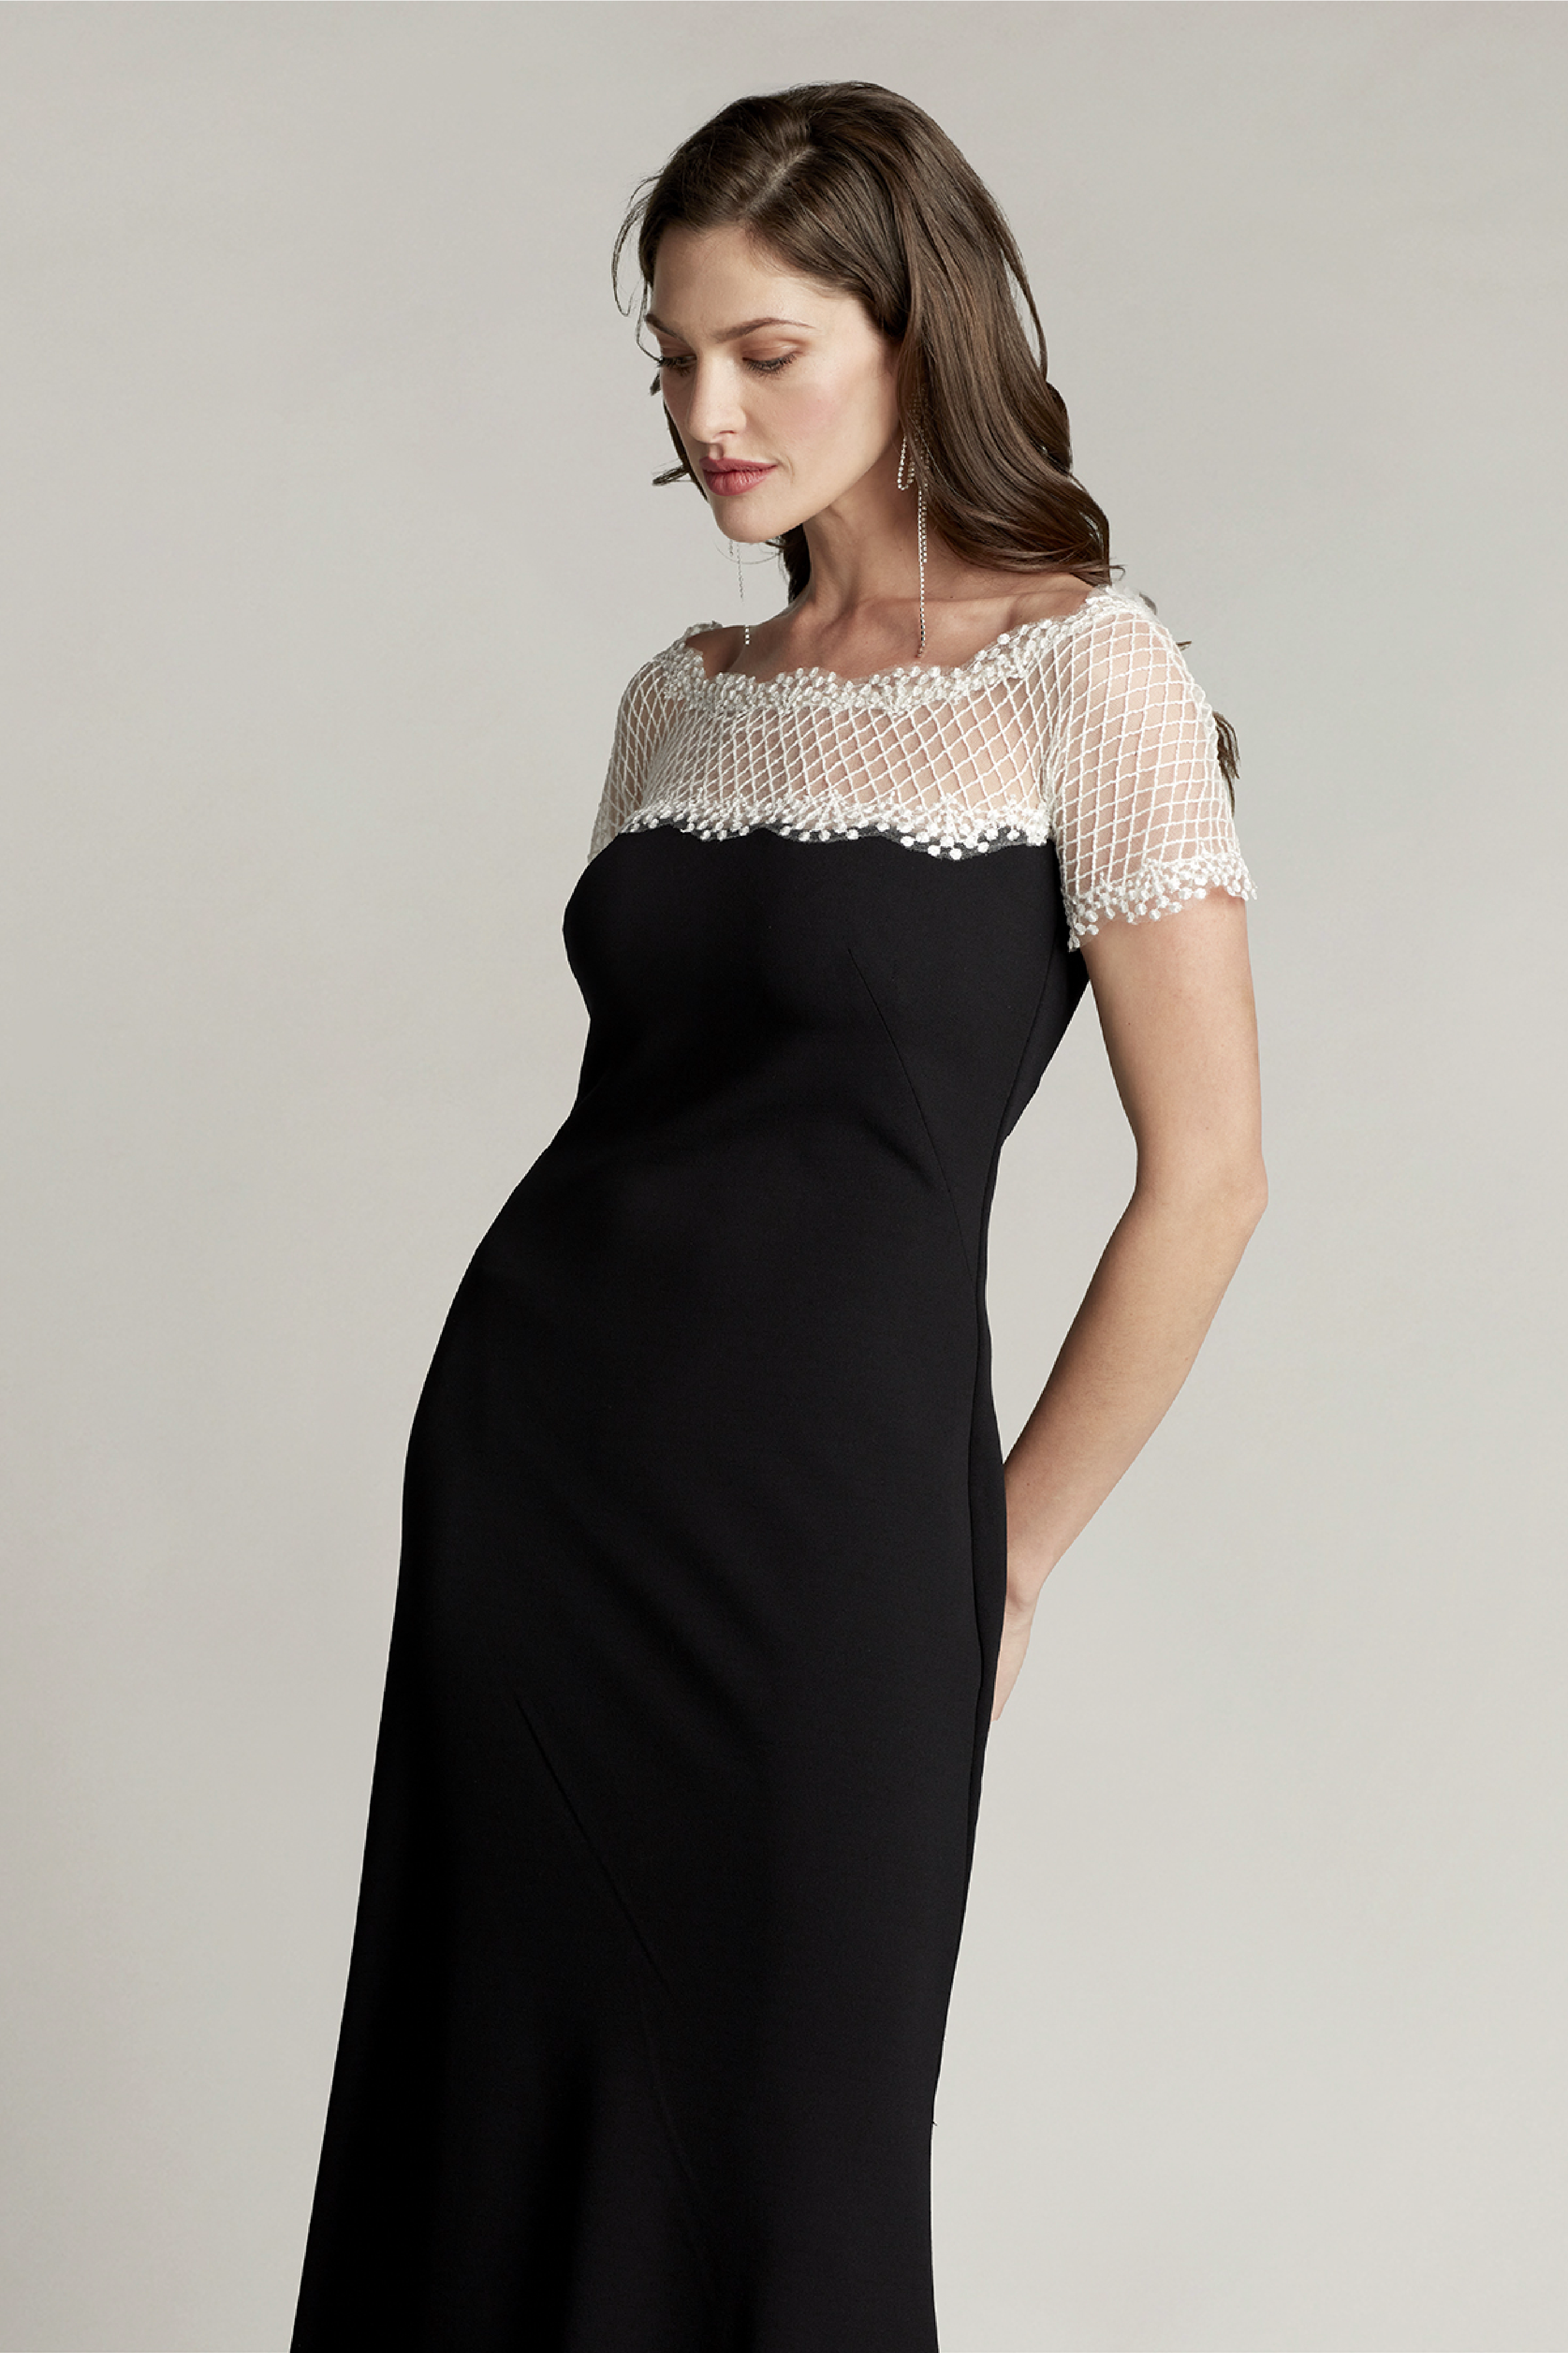 Contrast Illusion Crepe Gown